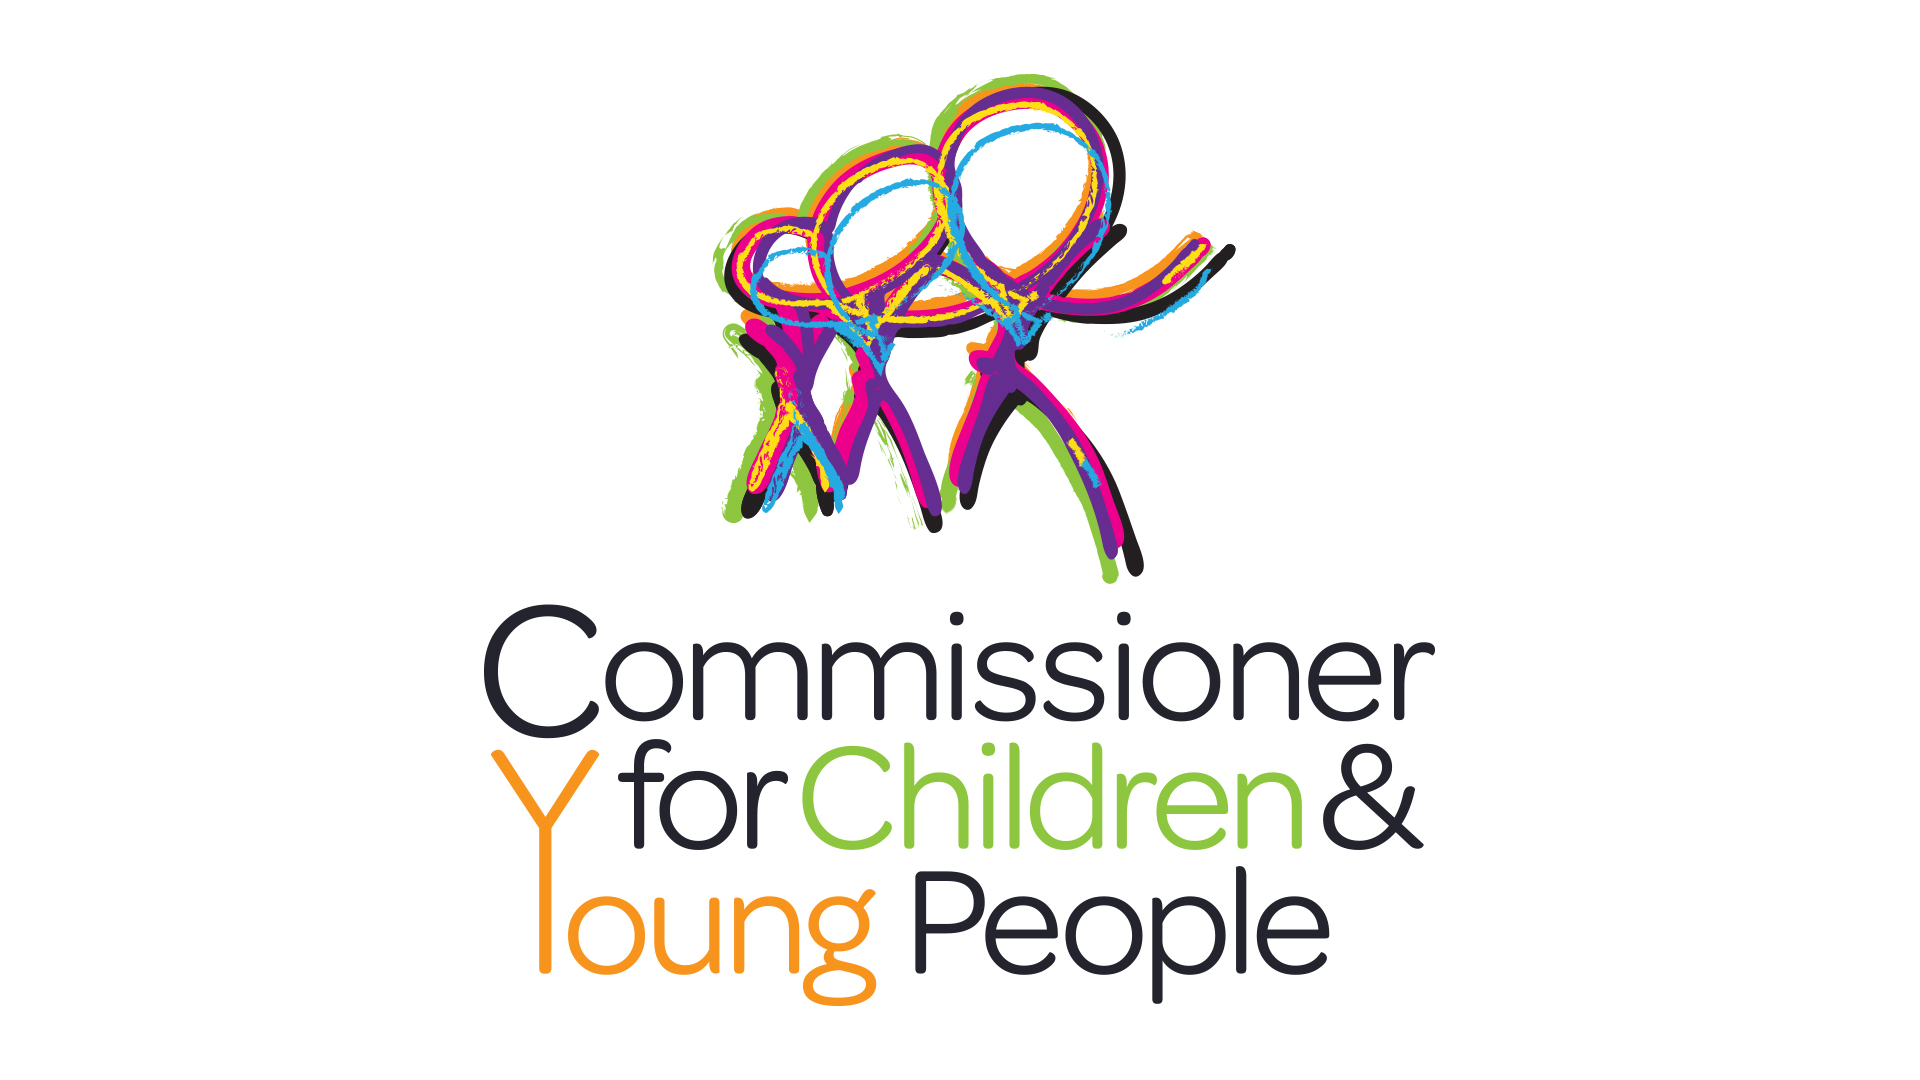 Annual Report to Children and Young People 2020-2021